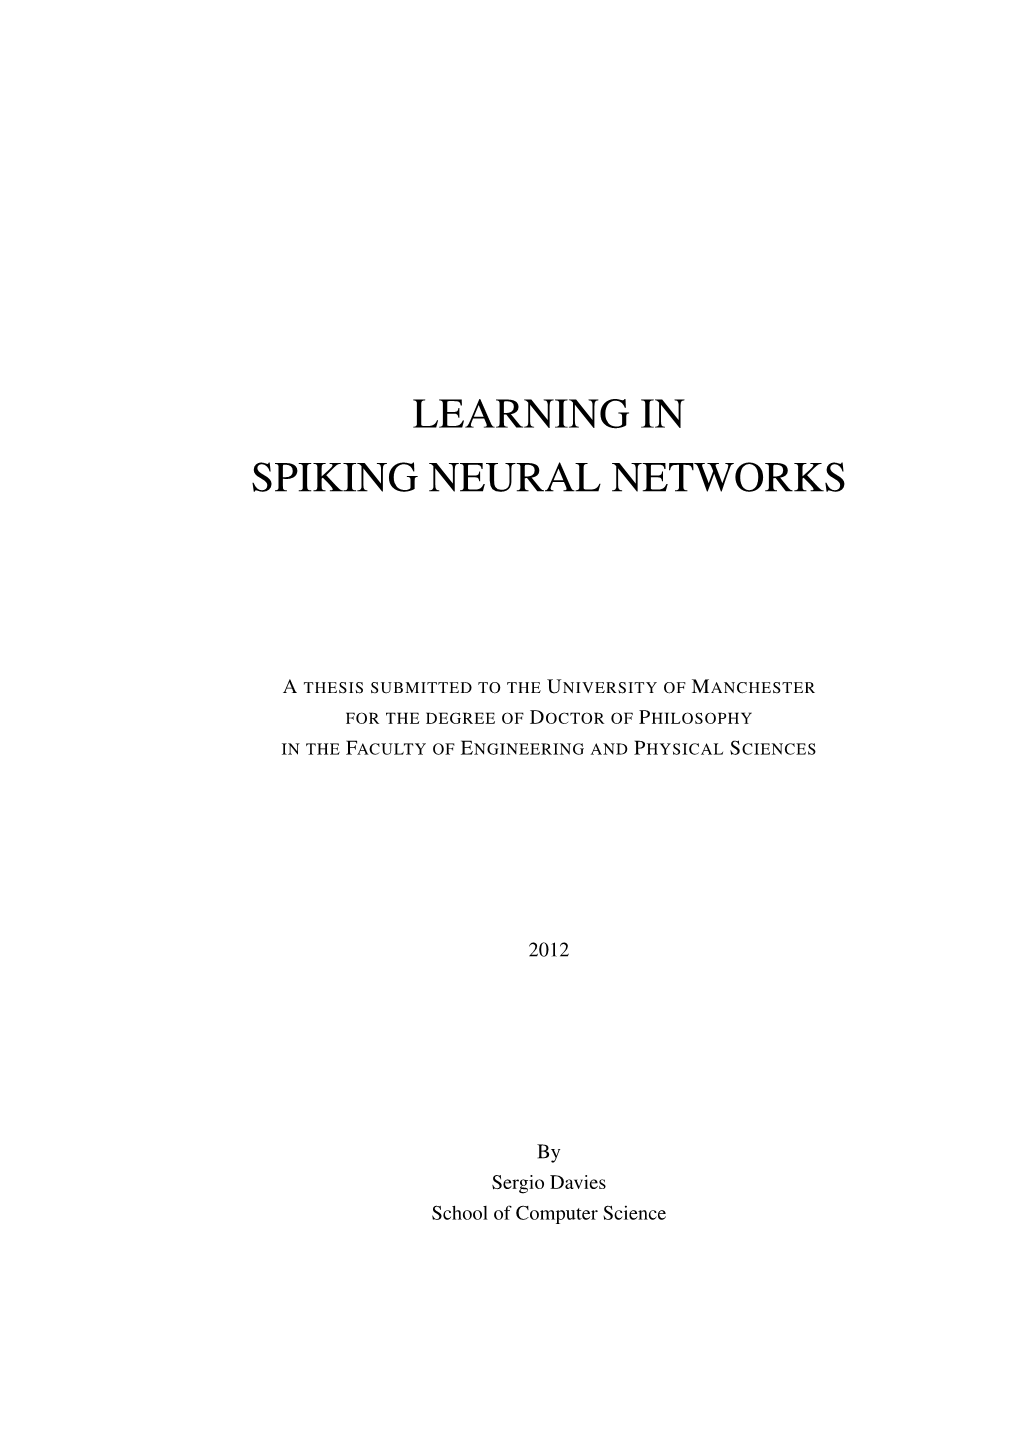 Learning in Spiking Neural Networks